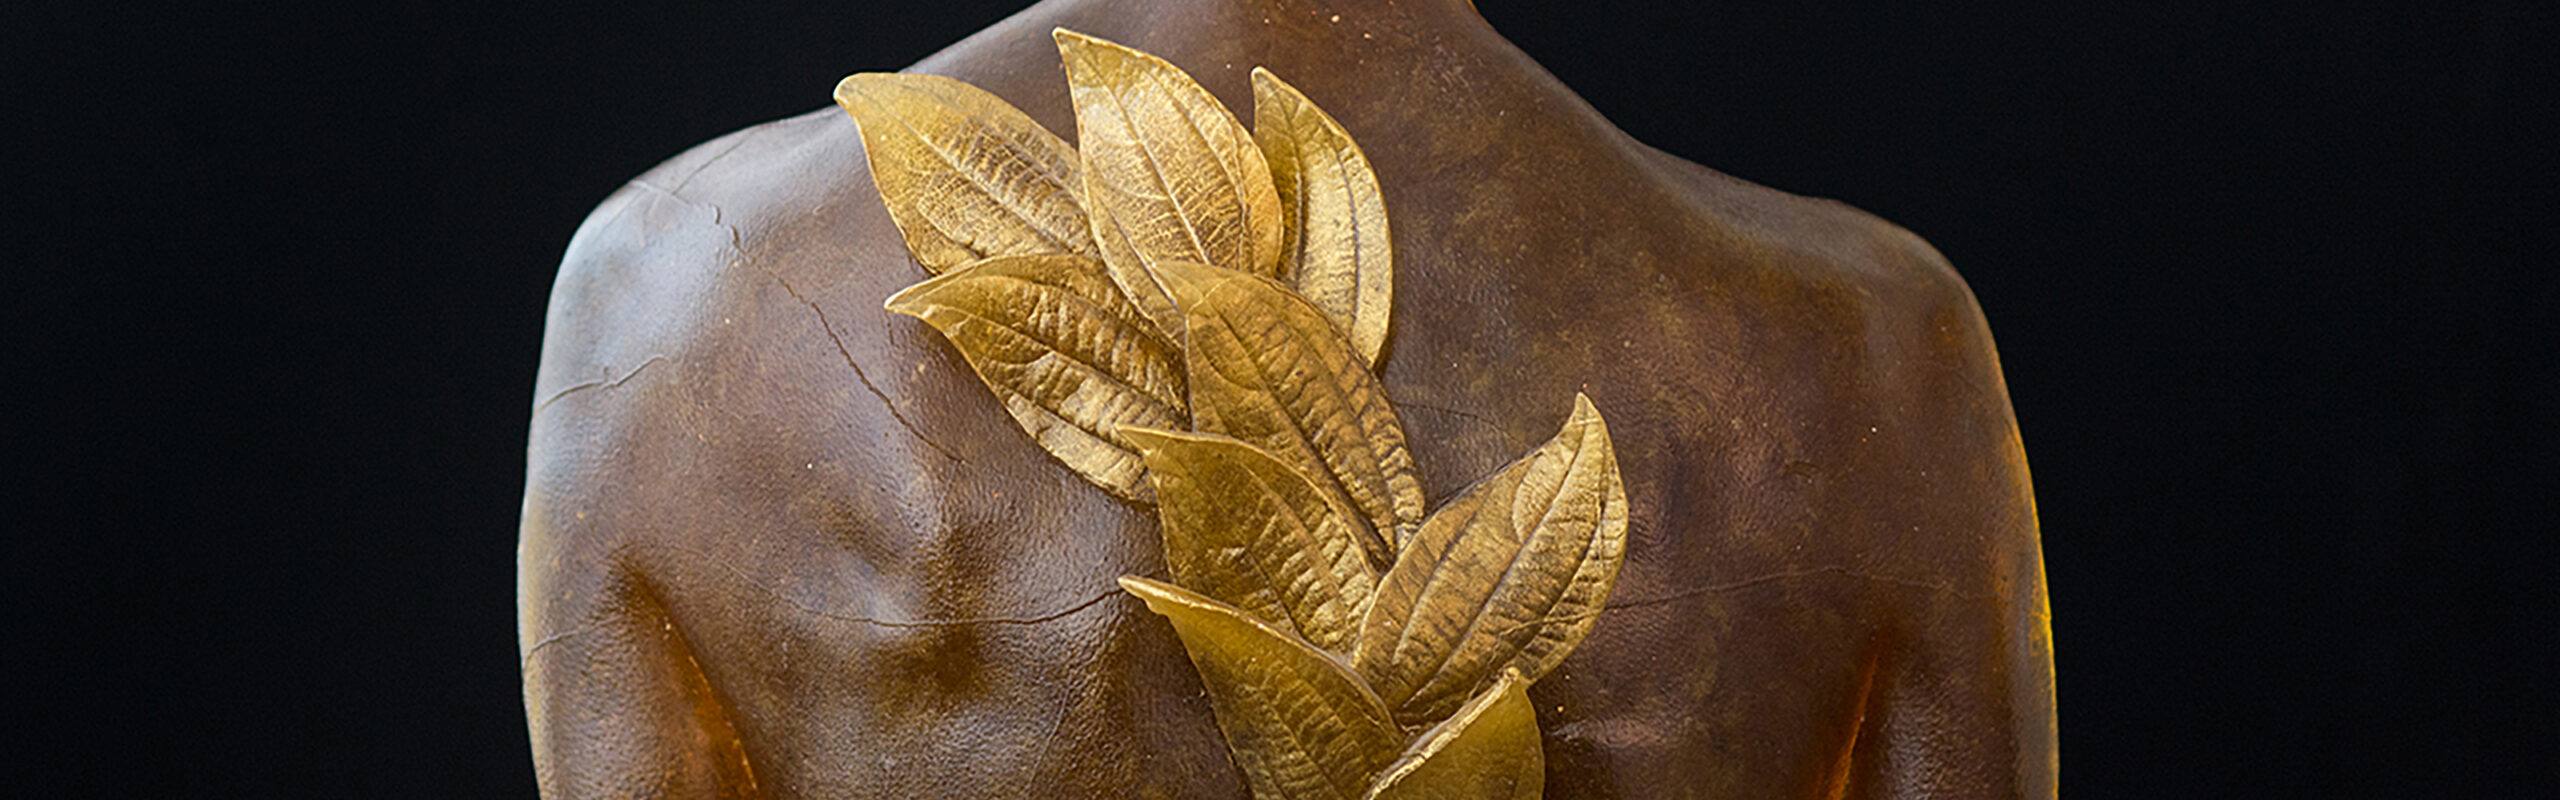 Mary Van Cline (American, b. 1954), Torso with Gold Leaves, 2004, pâte de verre with gold leaf, 13 x 17 x 6 inches. Palmer Museum of Art, Gift of Bette and Arnold Hoffman, 2016.115. © Mary Van Cline